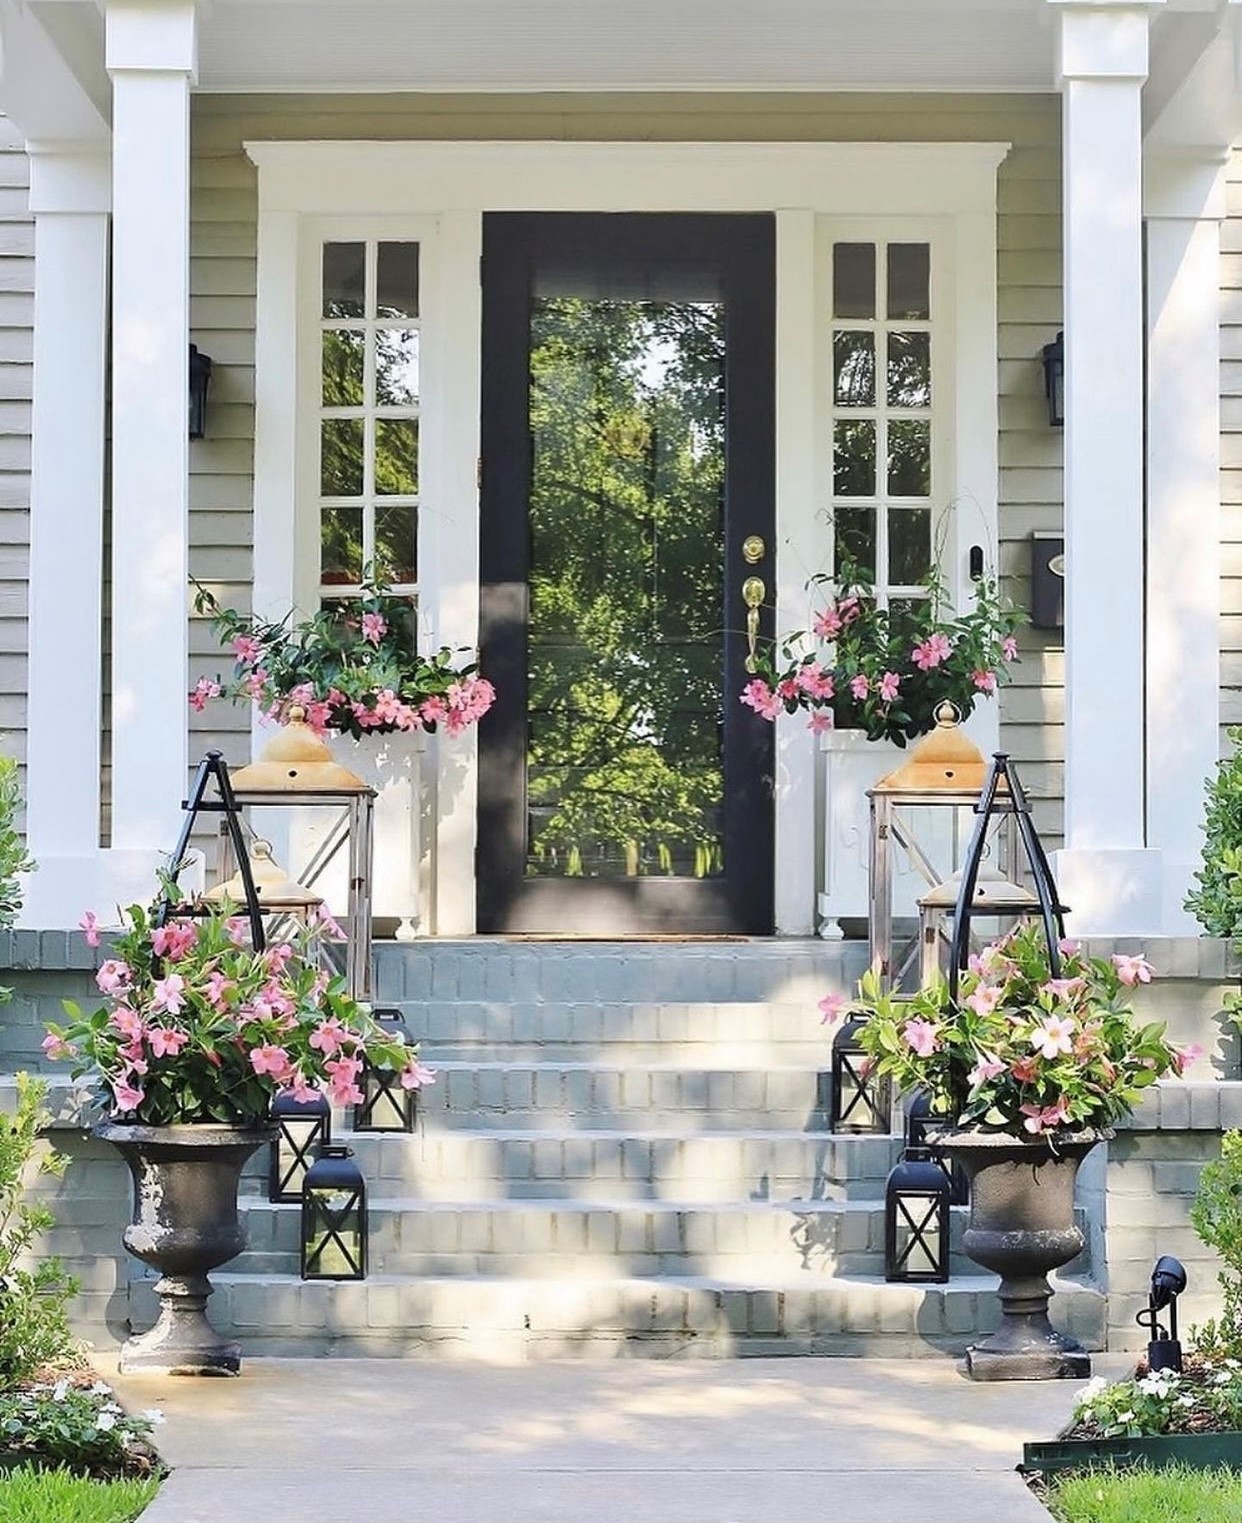 Home with great curb appeal from flowers and greenery